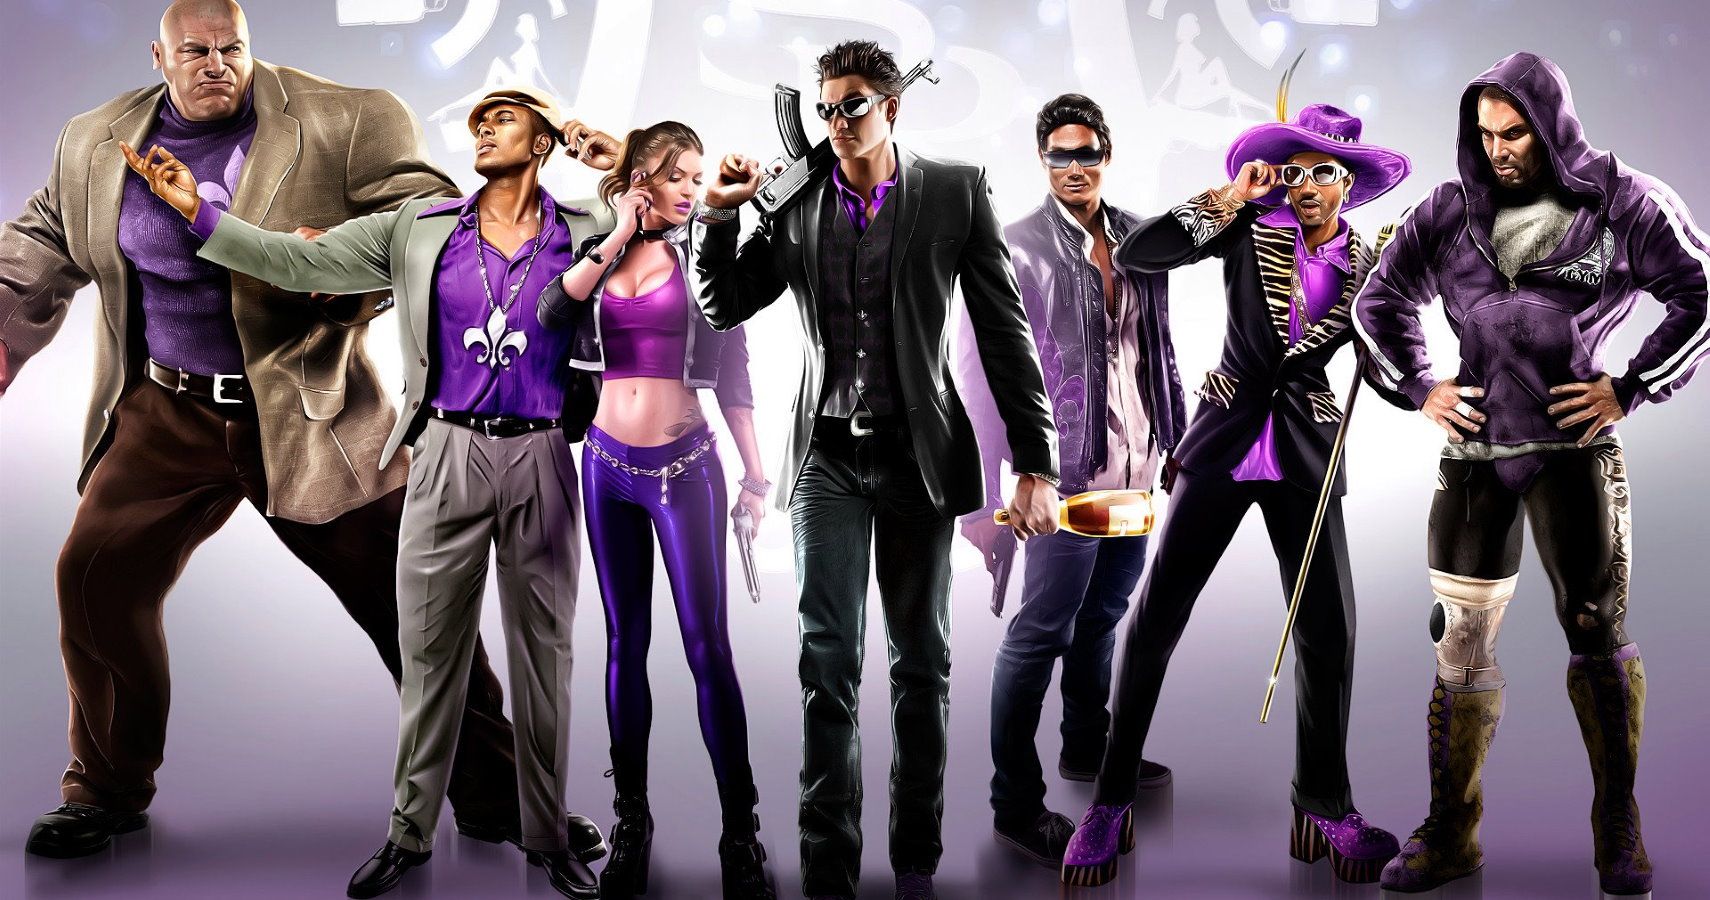 Saints Row®: TheThird™ - Remastered Announce Trailer (Official) 